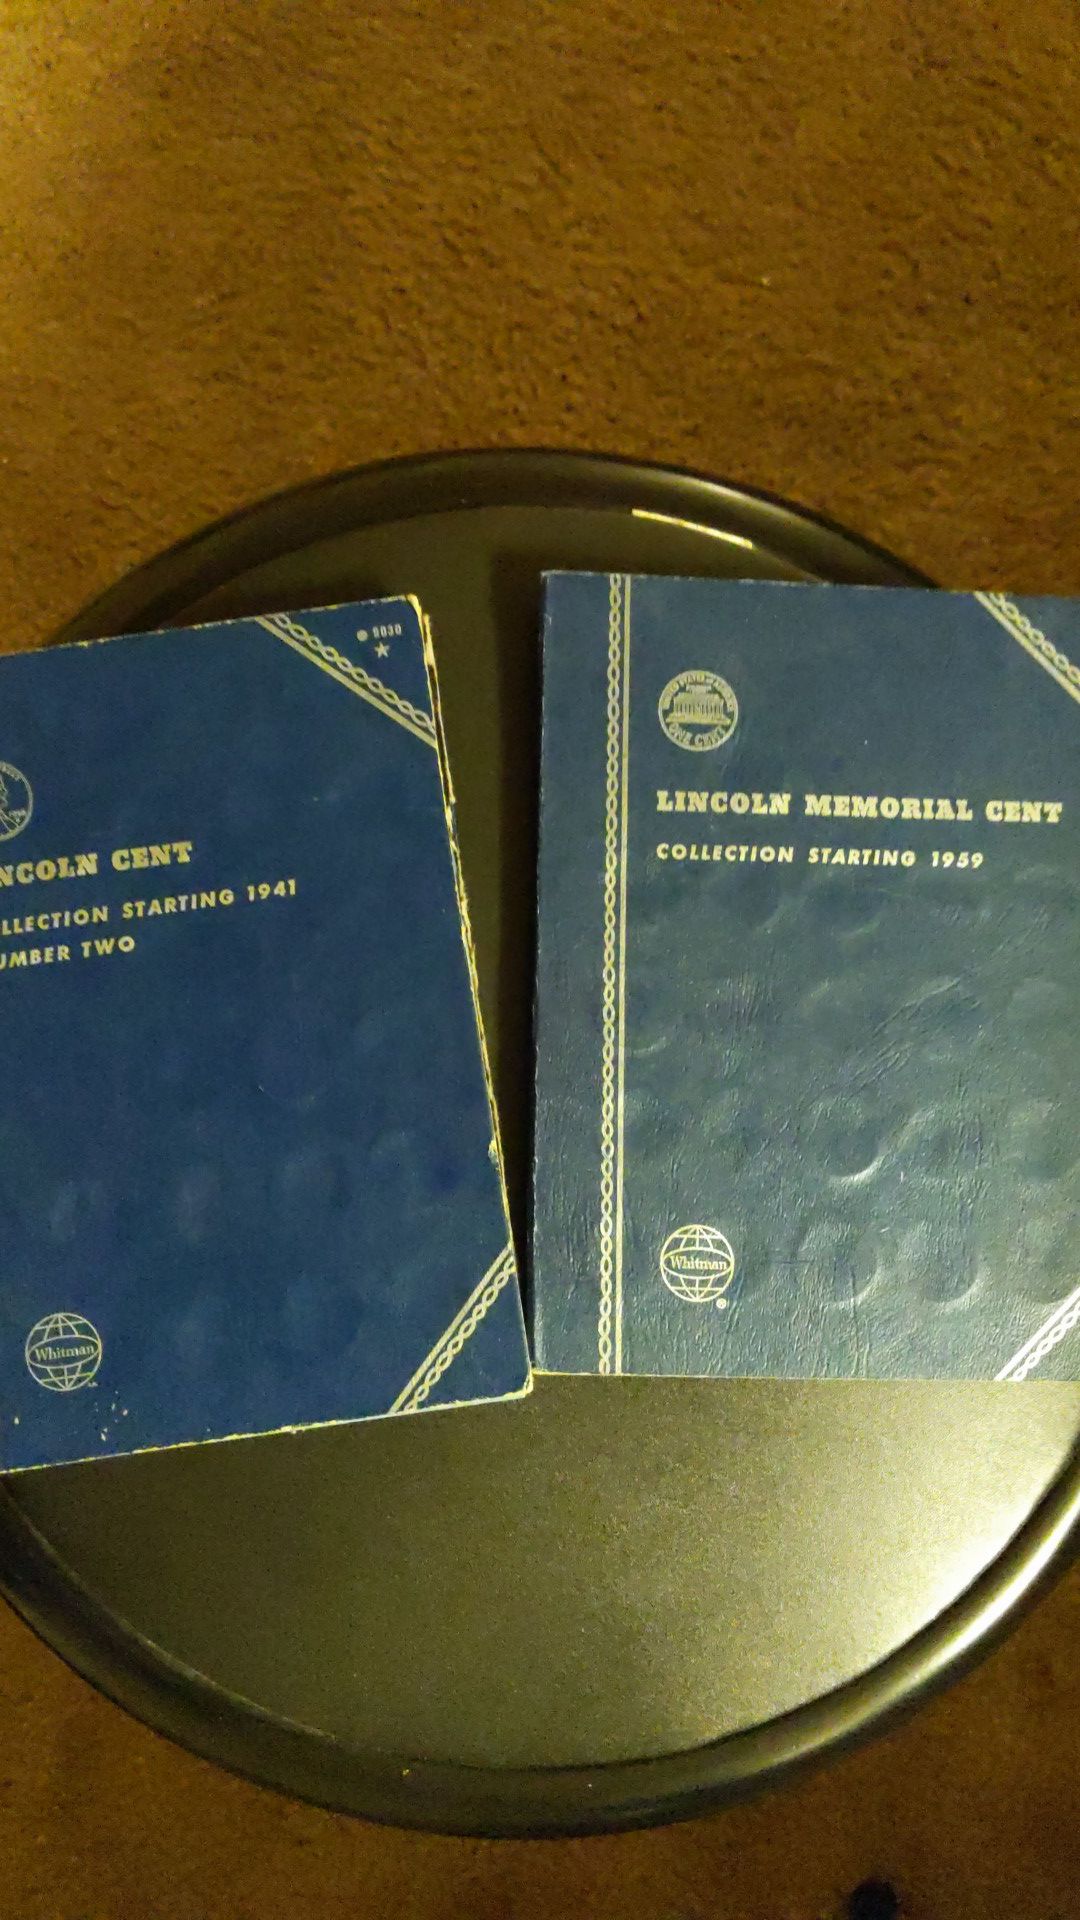 Lincoln Cent Collection Starting 1941 and Lincoln Memorial Cent Starting 1965